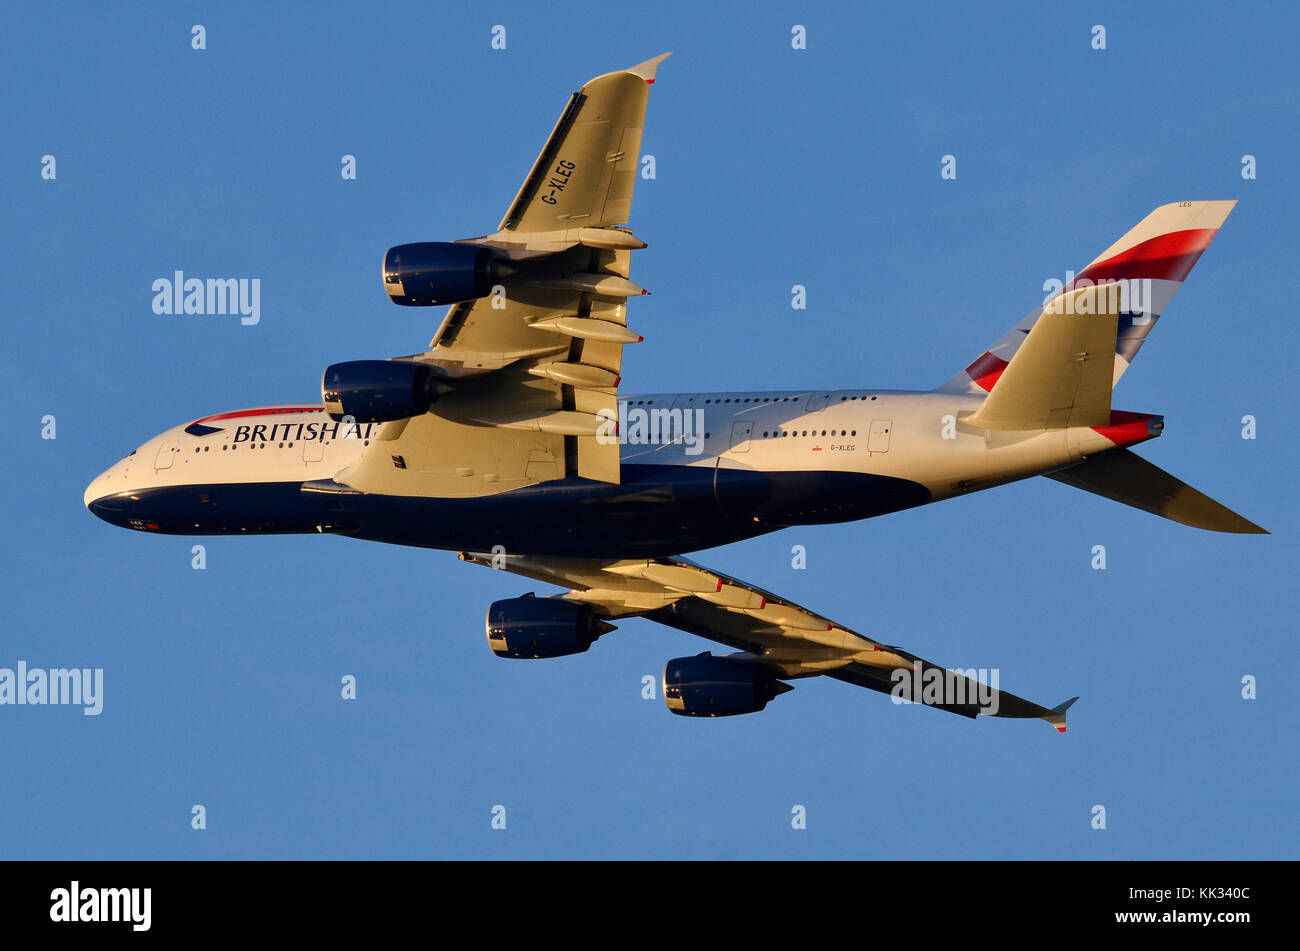 Airbus A380, British Airways, climbing out from London heathrow Airport, UK, at sunset. Stock Photo